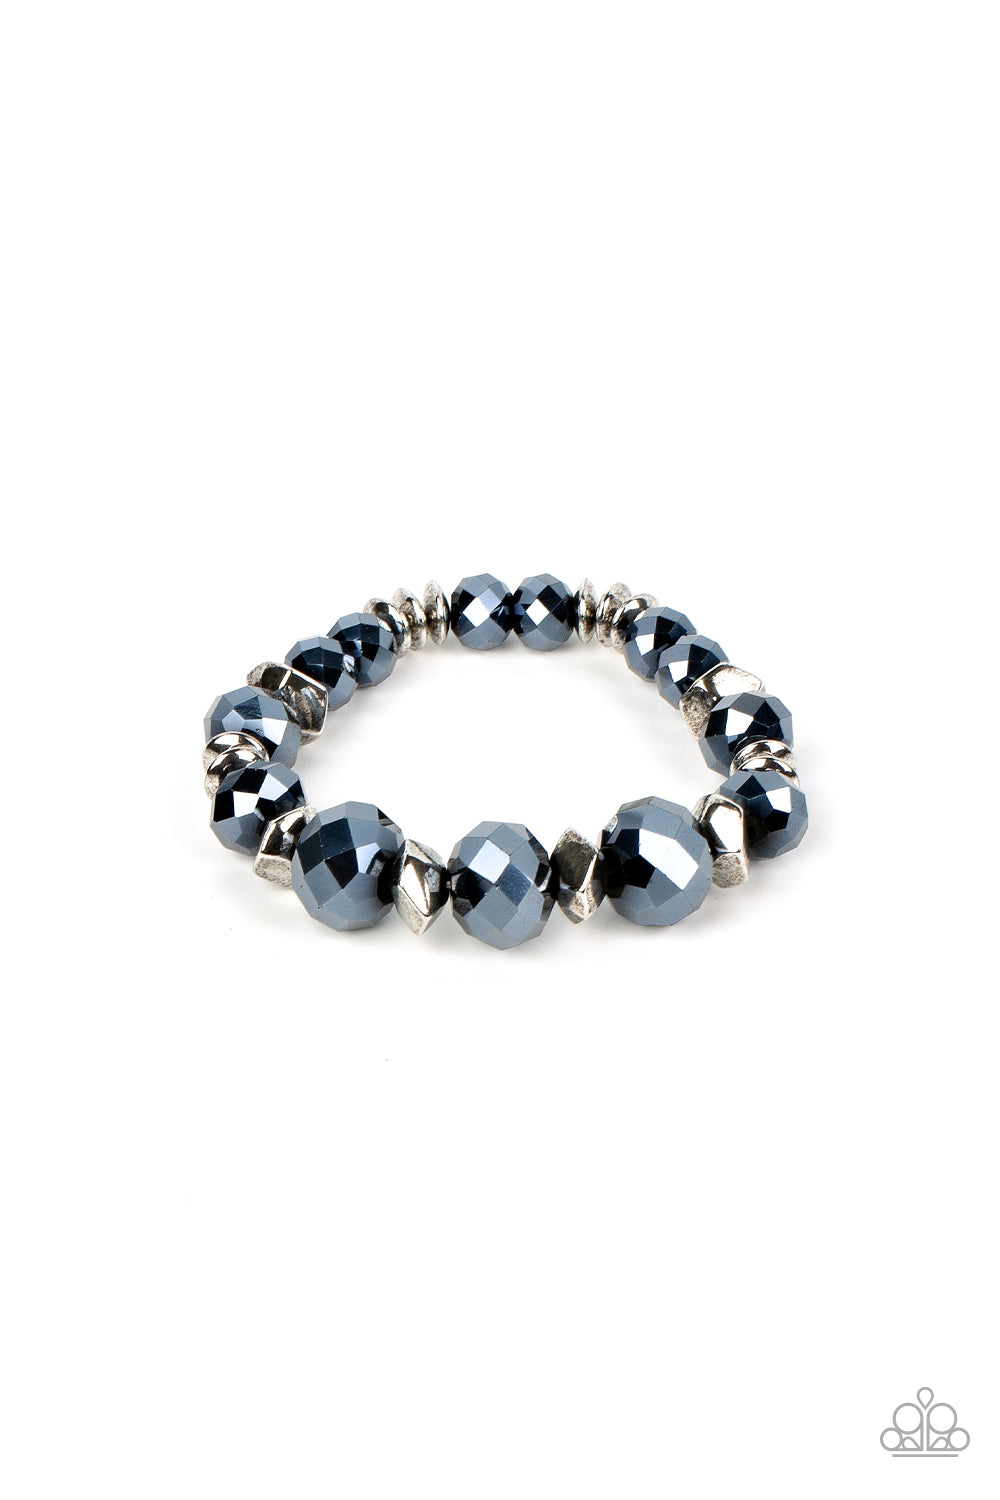 Astral Auras - Blue Crystal-Like Gems, Silver Discs, & Faceted Silver Accent Paparazzi Stretch Bracelet